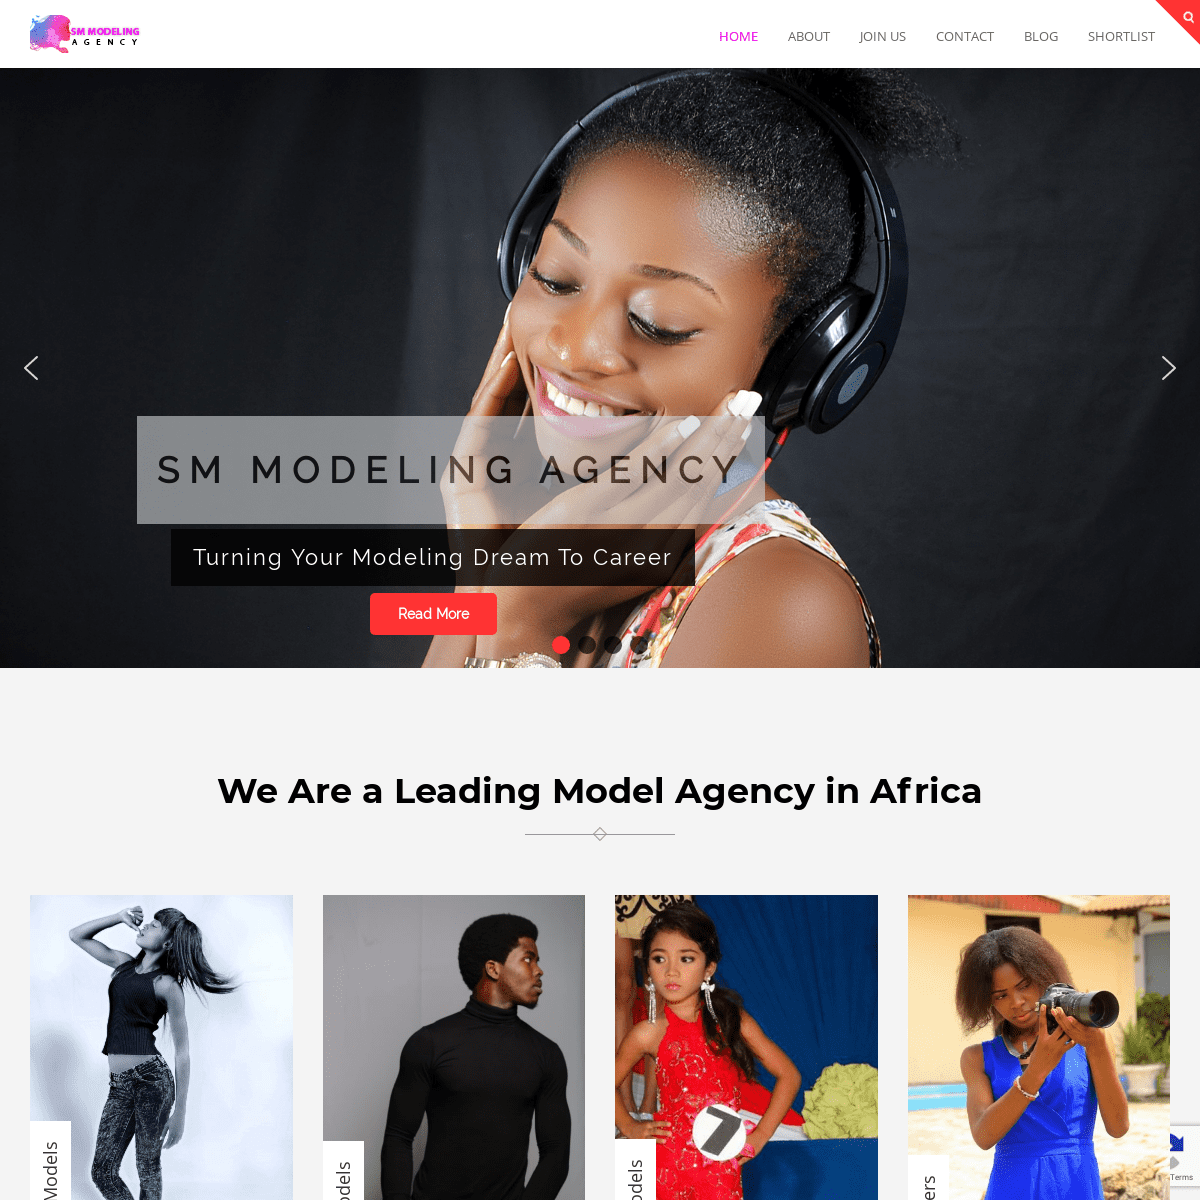 A complete backup of smmodelingagency.com.ng